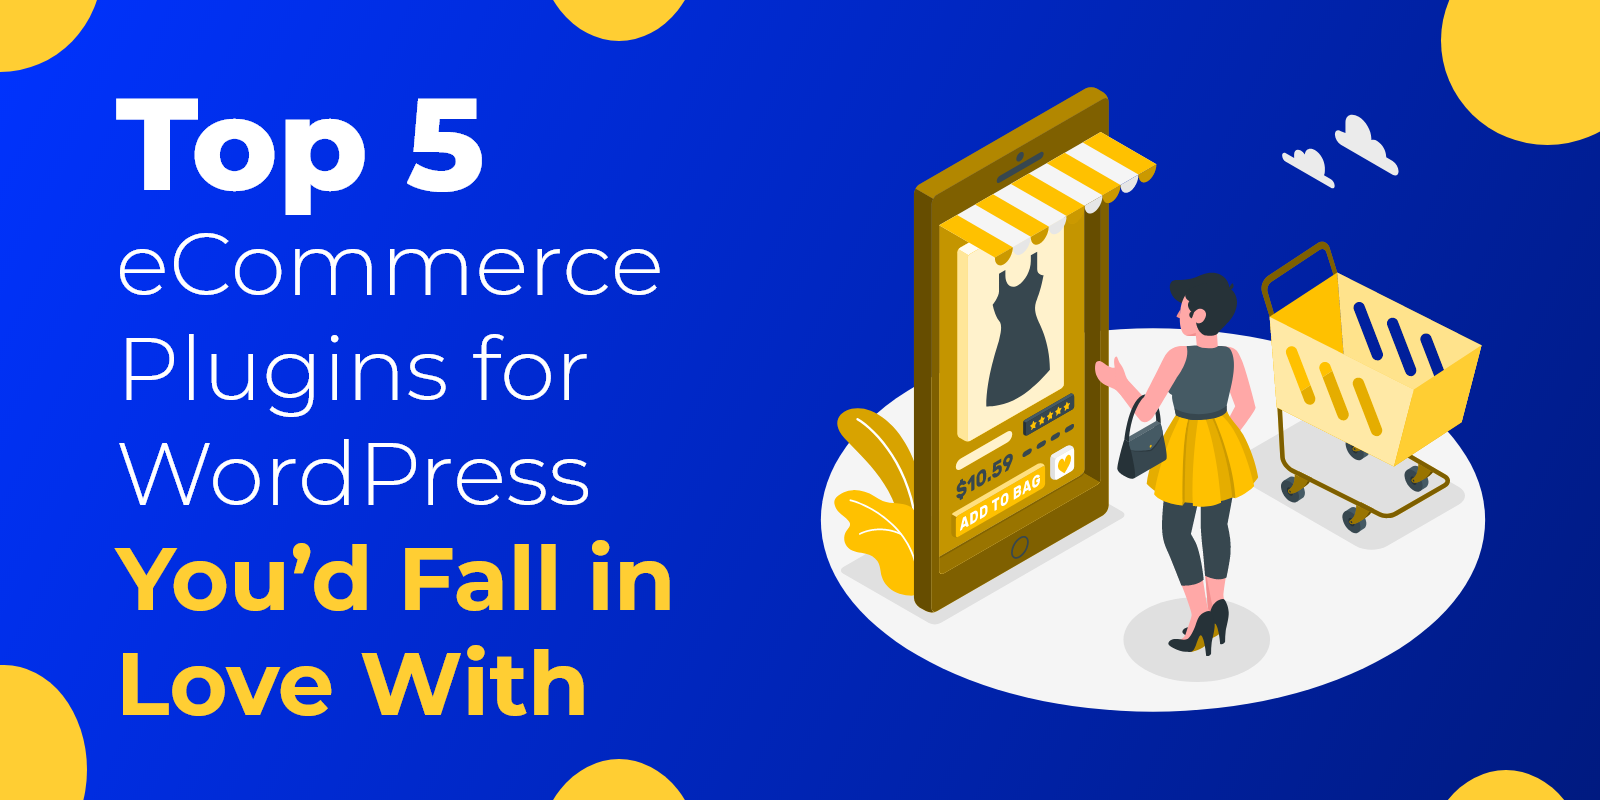 Top 5 eCommerce Plugins for WordPress You’d Fall in Love With